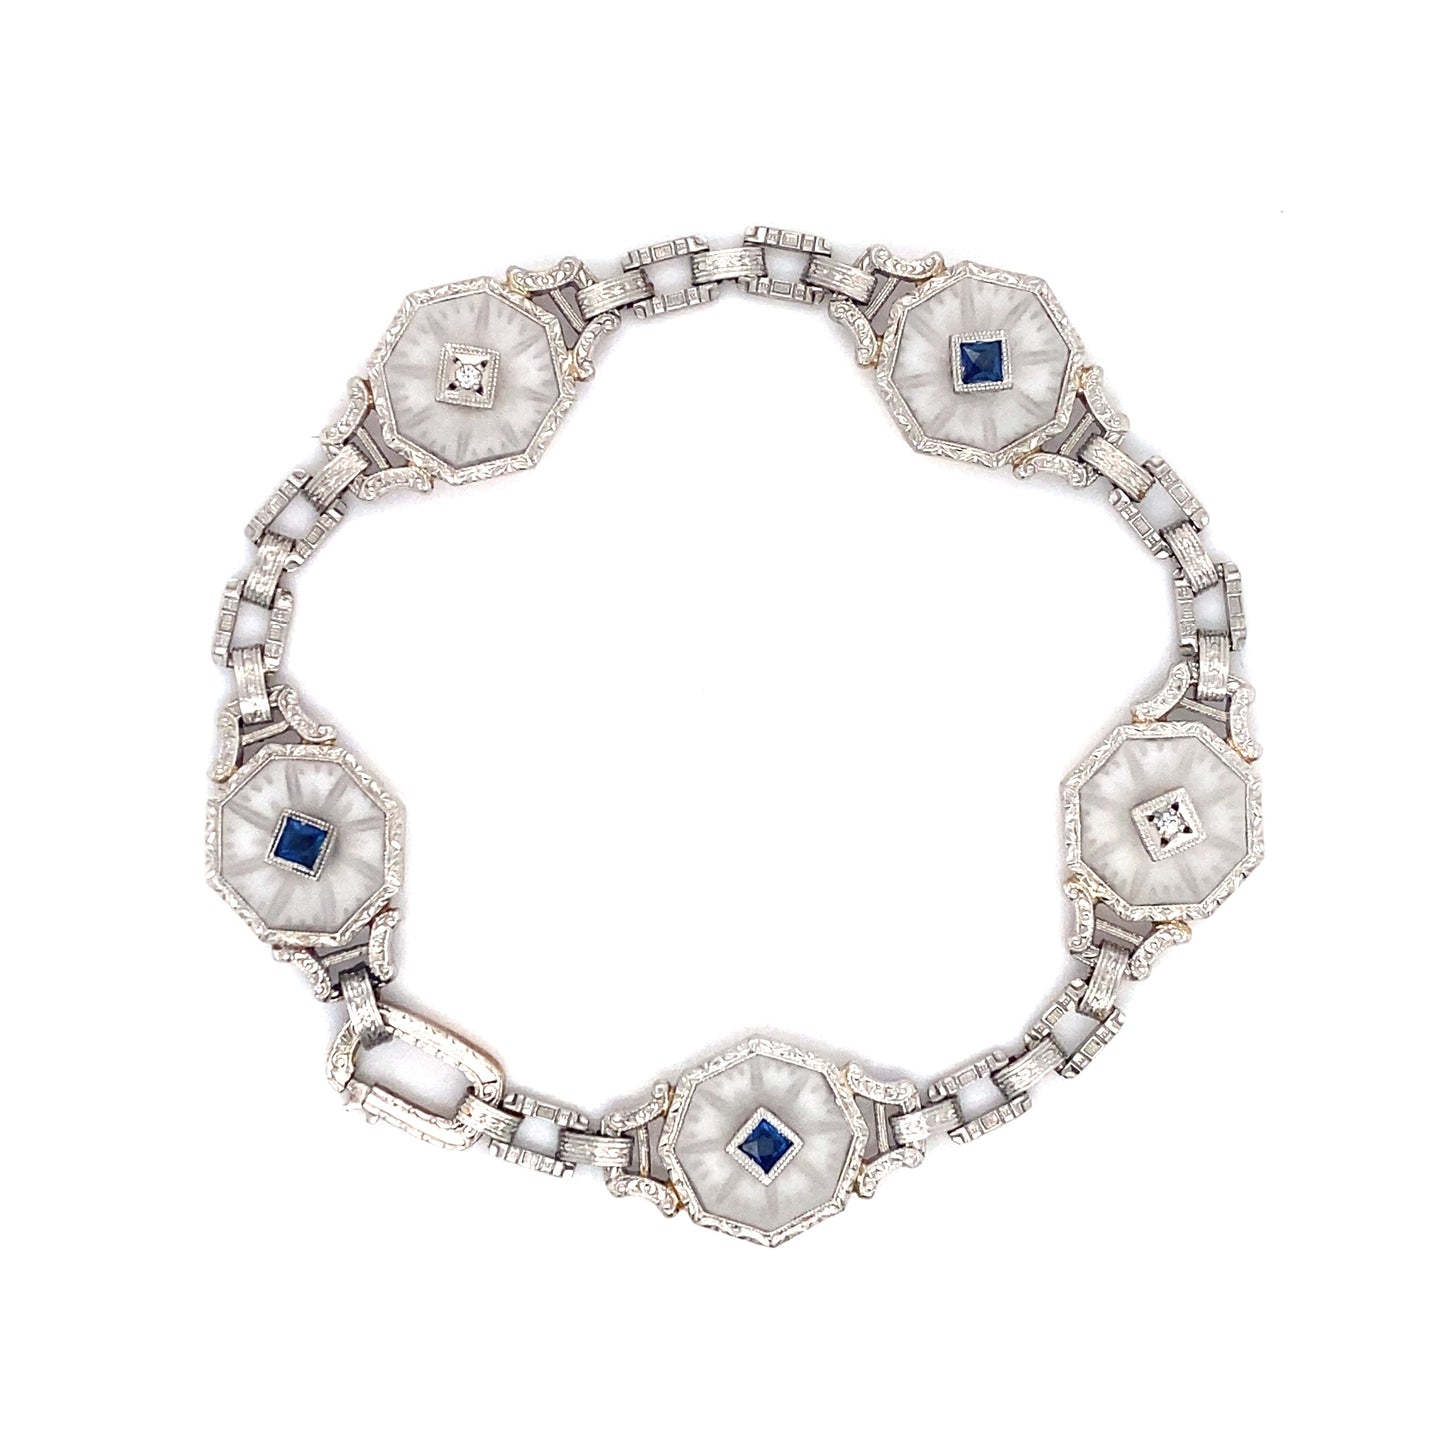 Circa 1880s Victorian Rock Crystal, Sapphire and Diamond Bracelet in 14K Gold